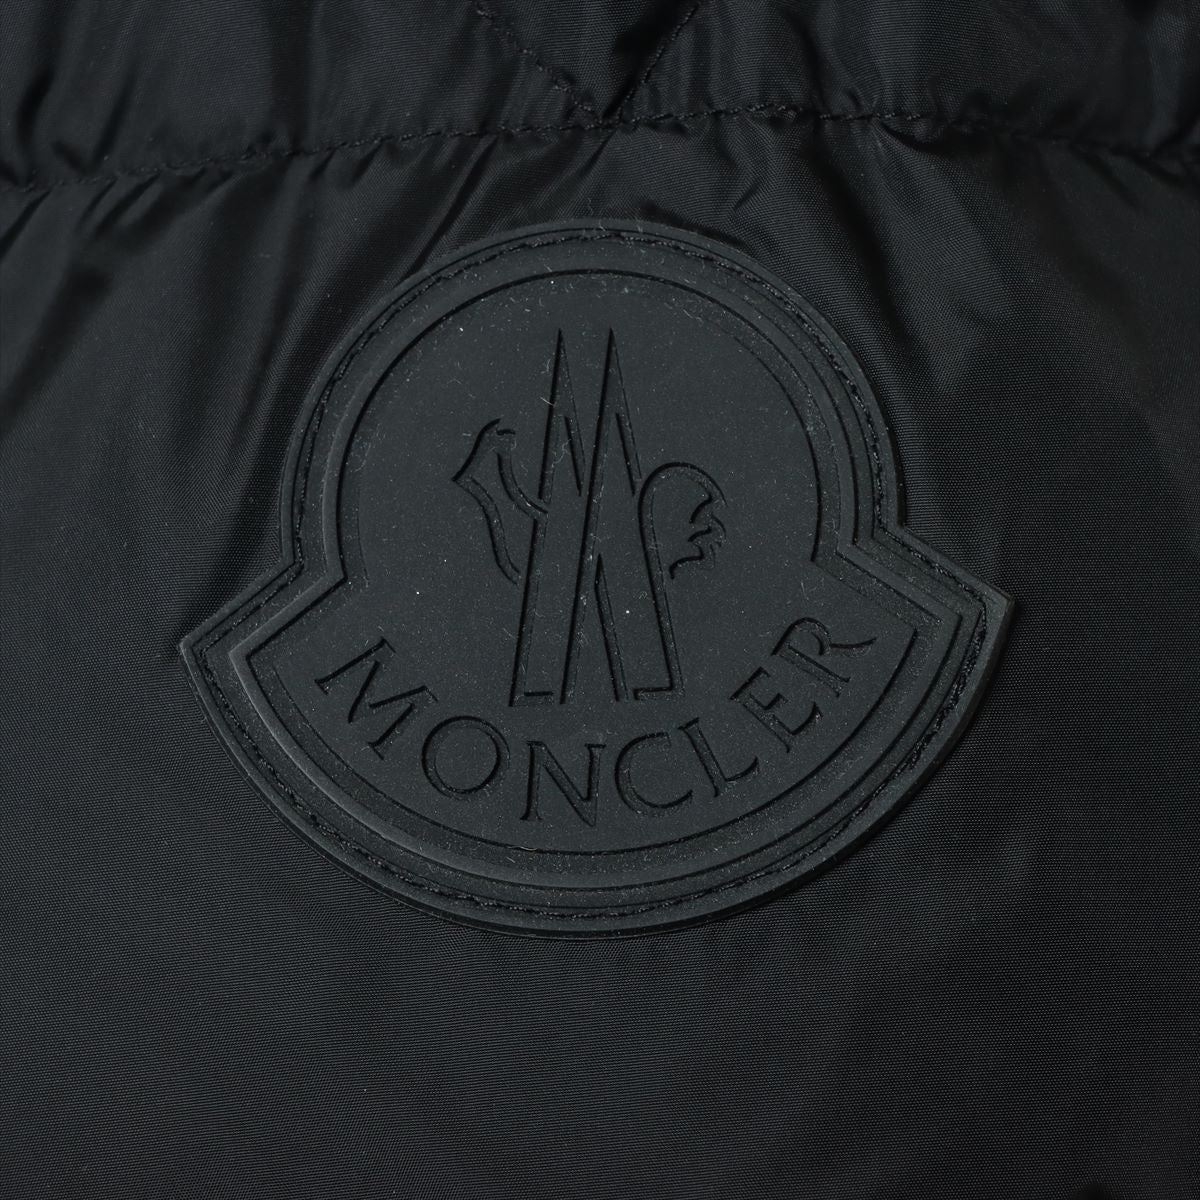 Moncler LENORMAND 21 years Polyester & nylon Down jacket 5 Men's Black  Can store hood Has spare buttons